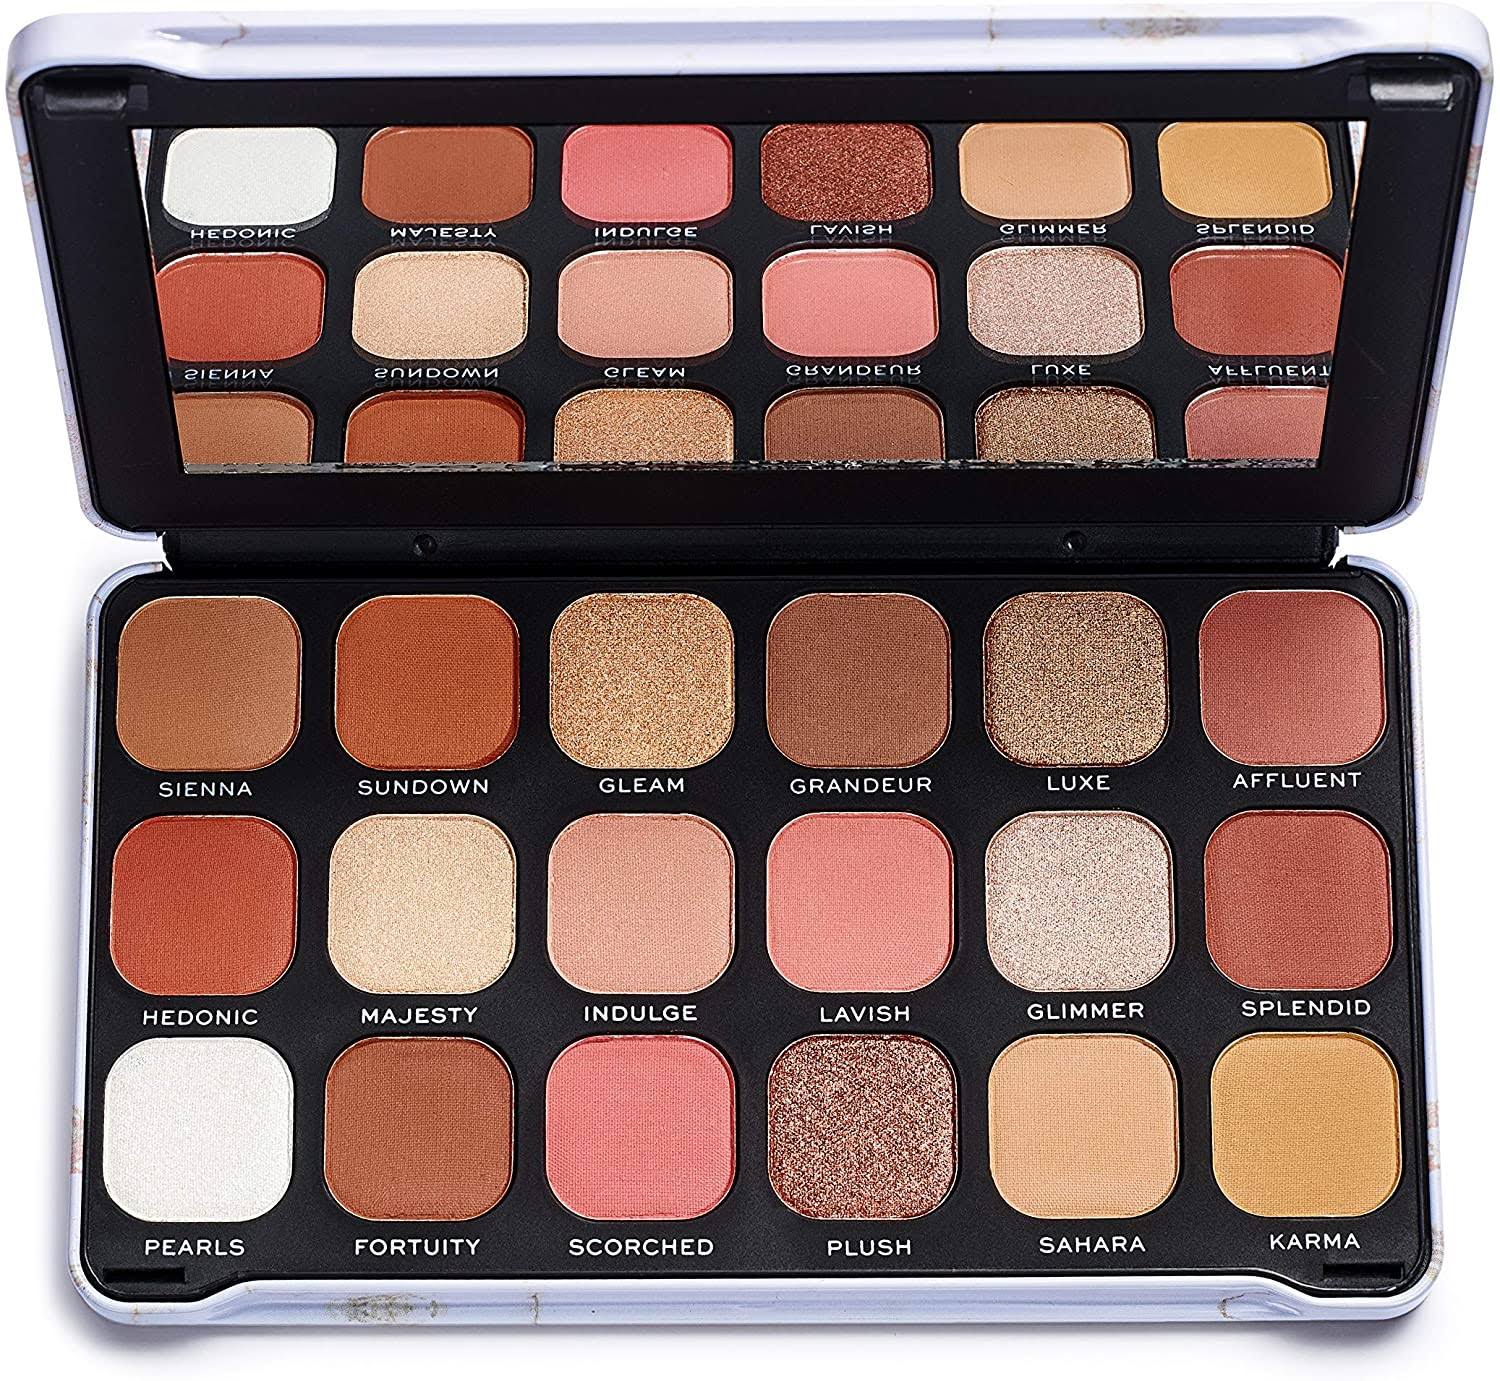 Makeup Revolution Forever Flawless Eyeshadow Palette - Decadent